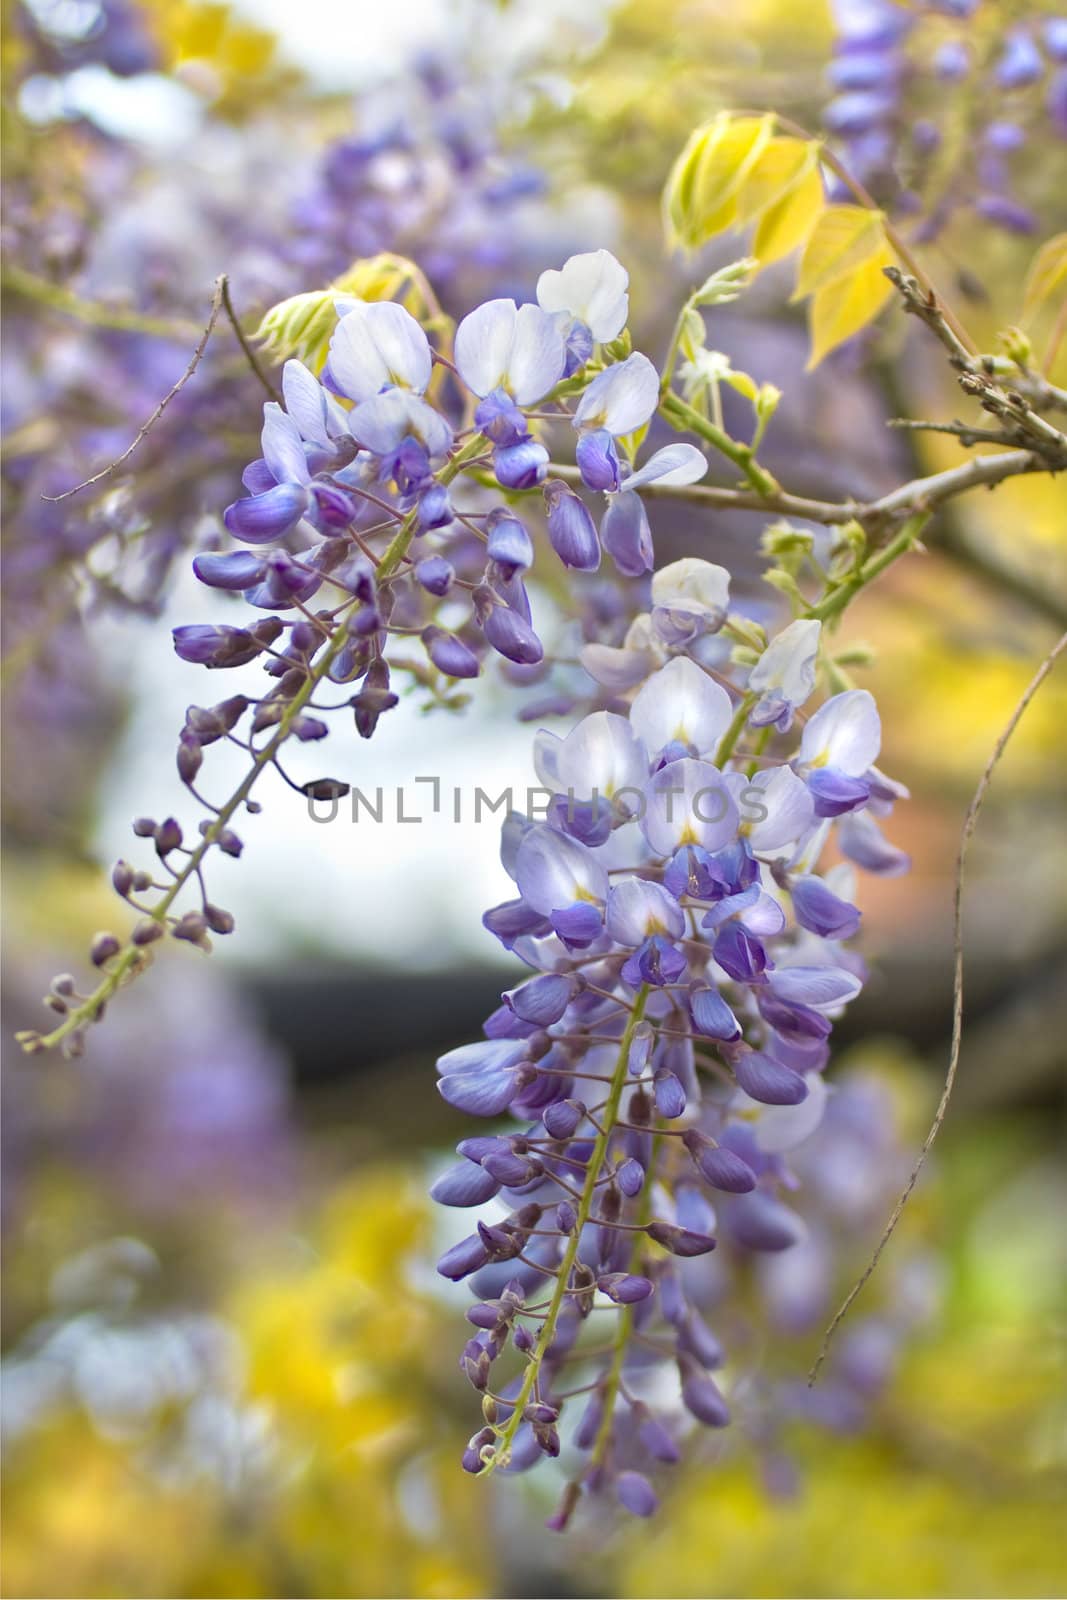 Chinese Wisteria or Wisteria sinensis by Colette